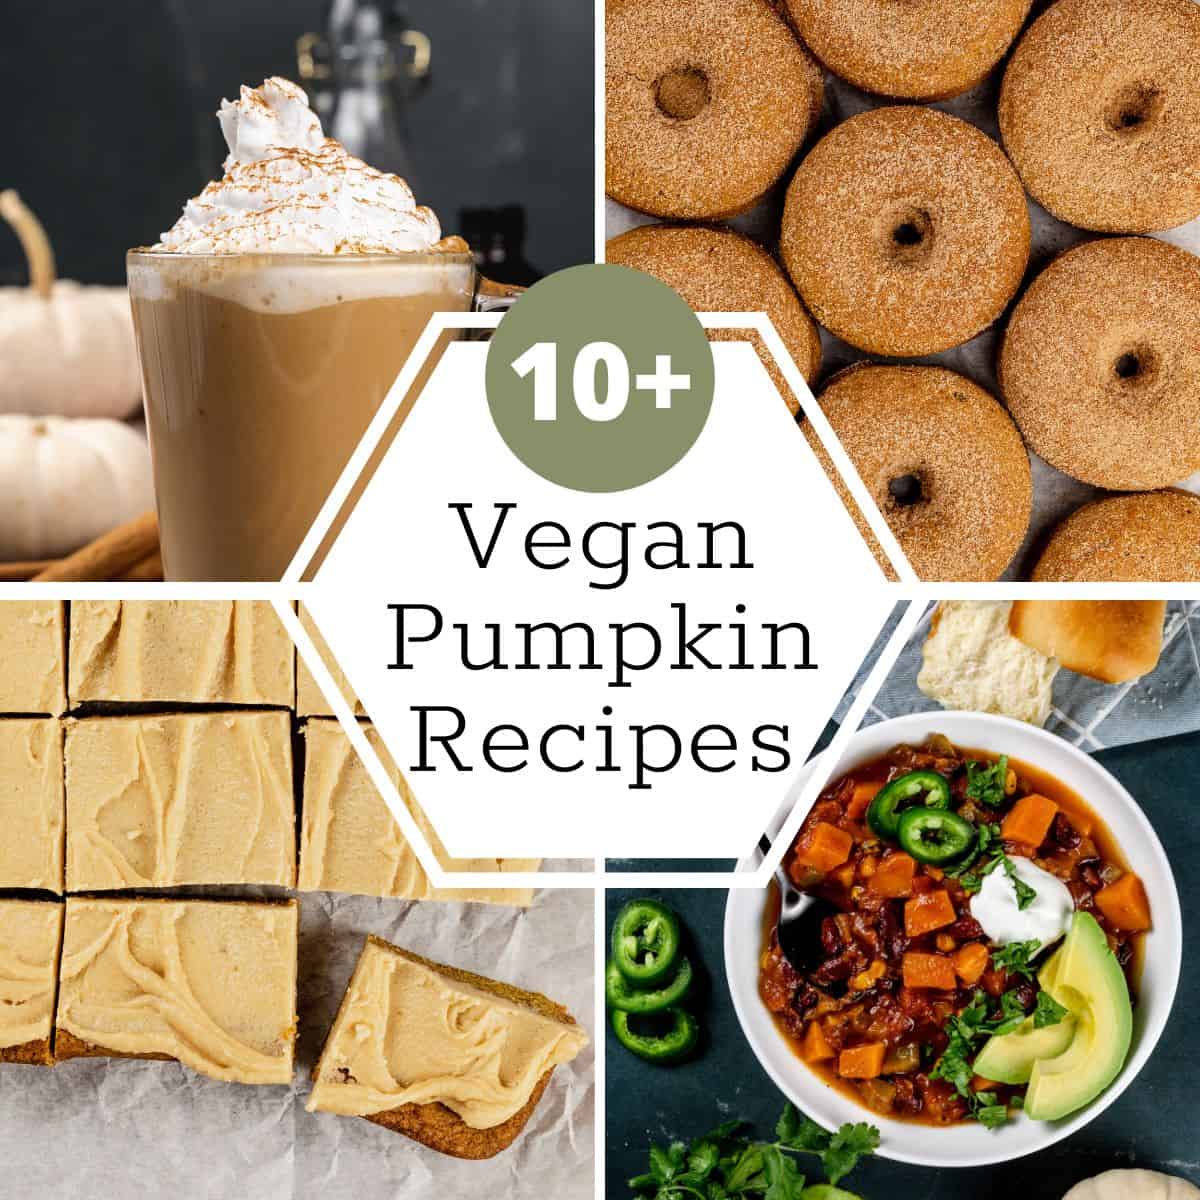 a collage of 4 images with different vegan pumpkin foods including pumpkin chili, pumpkin donuts, and a pumpkin spice latte. in the middle is a white box with black text that reads vegan pumpkin recipes.